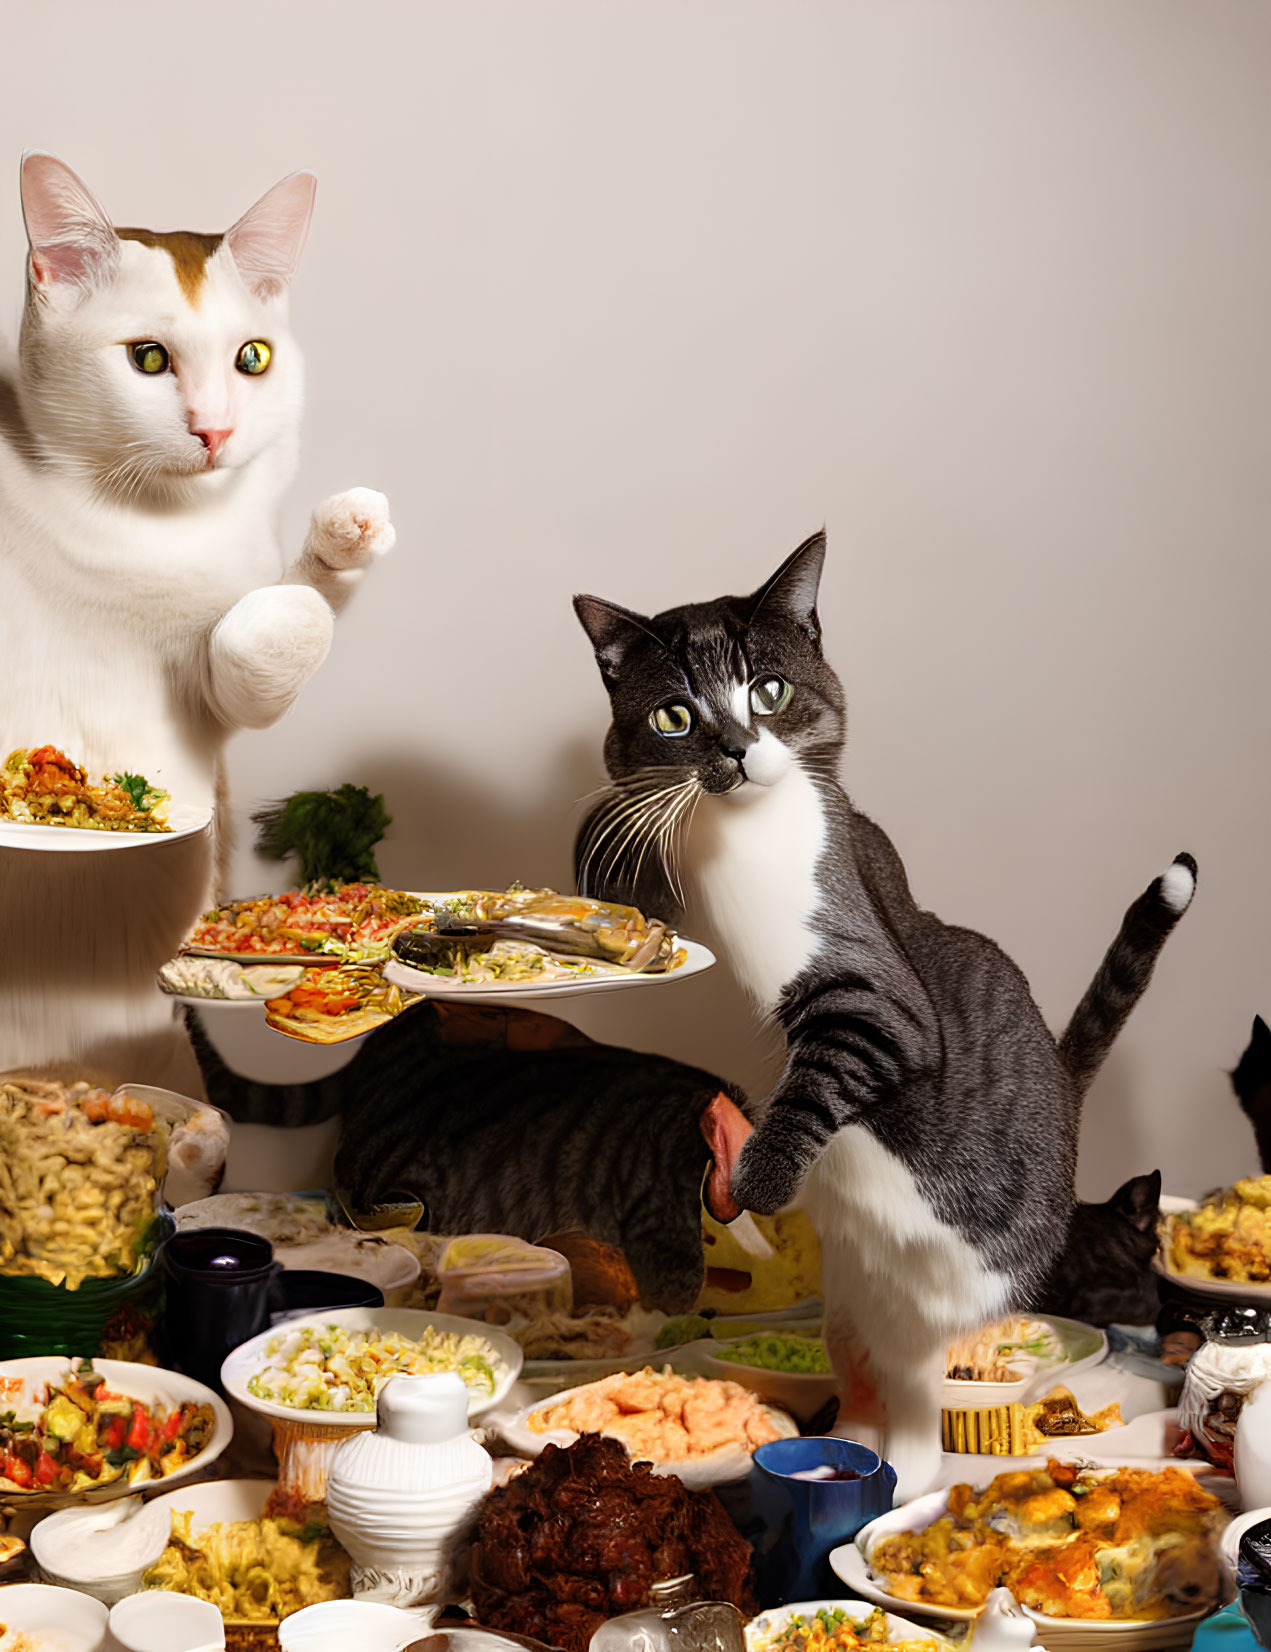 Cats in human-like postures dining at a whimsical feast